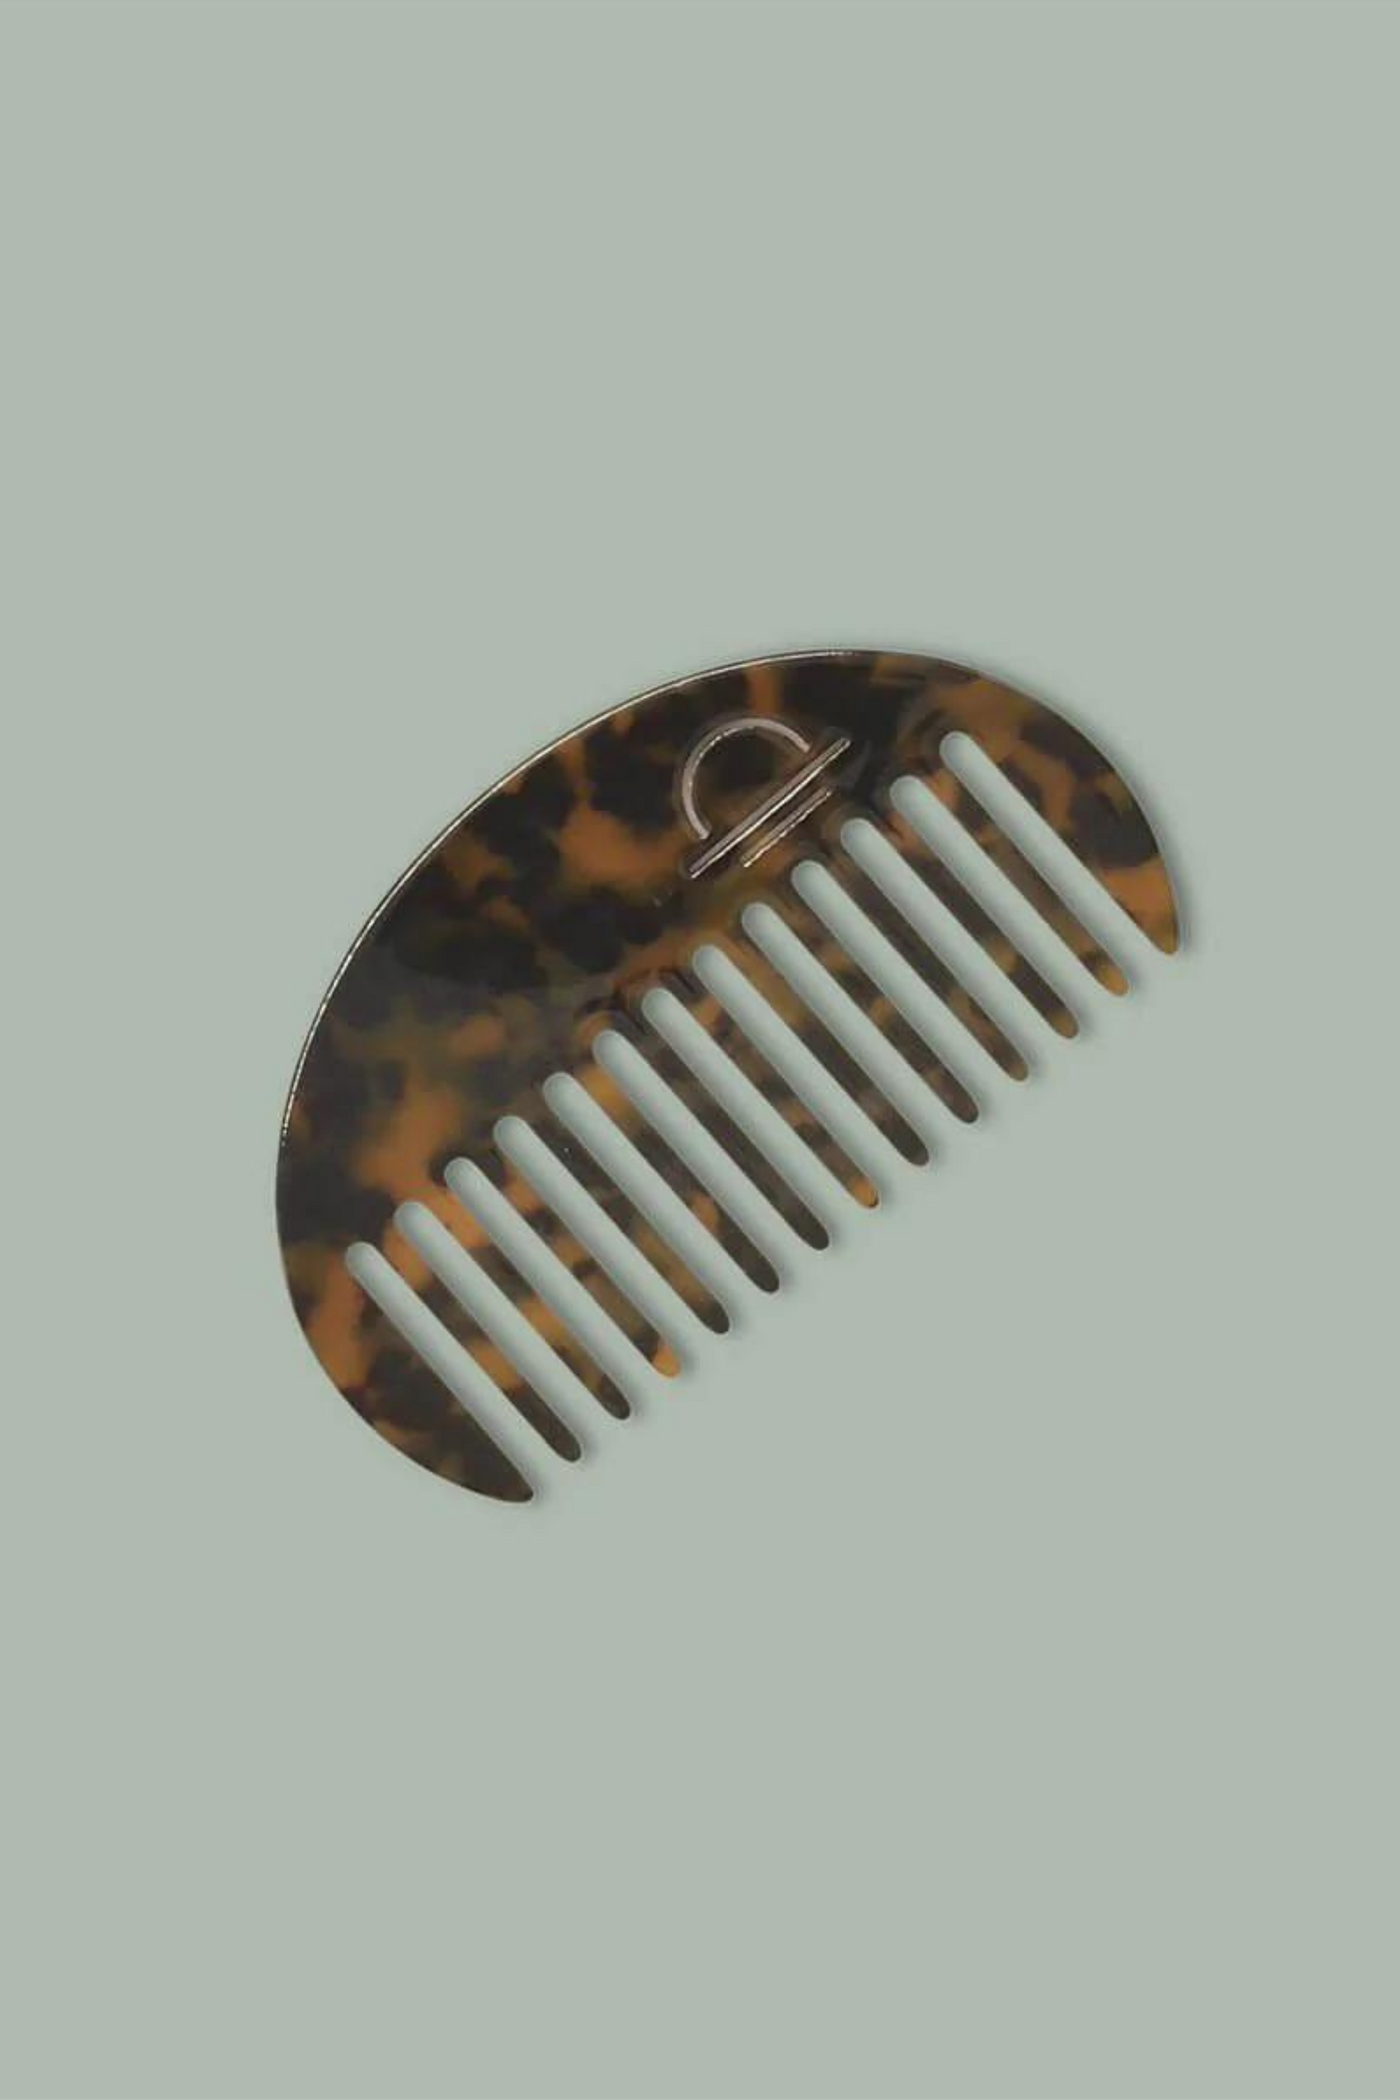 The Lake's round acetate comb is the perfect way to give your hair the attention it deserves. These combs are beautiful; they're also great for your hair! Gently massage your scalp with the comb to promote a healthy scalp. Available in both tortoiseshell and pearl. 